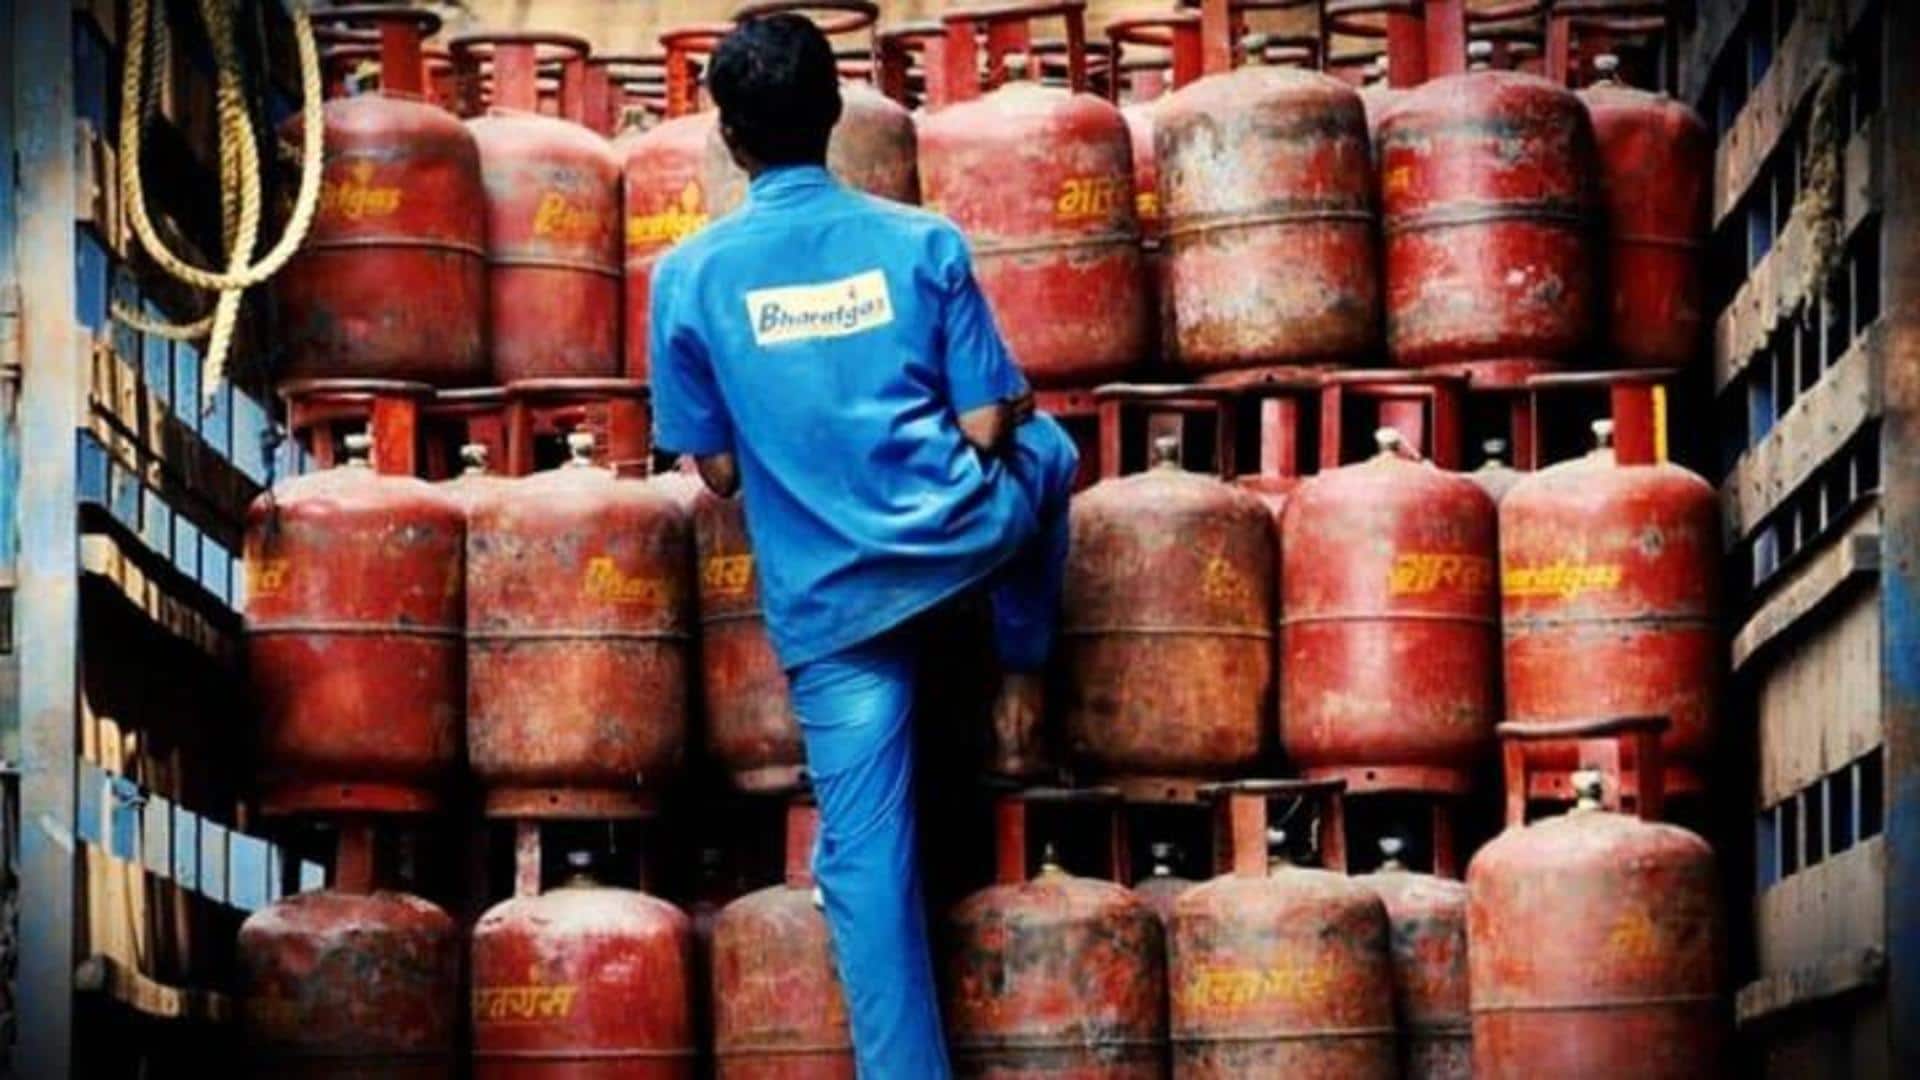 Commercial LPG cylinder price reduced by Rs. 100